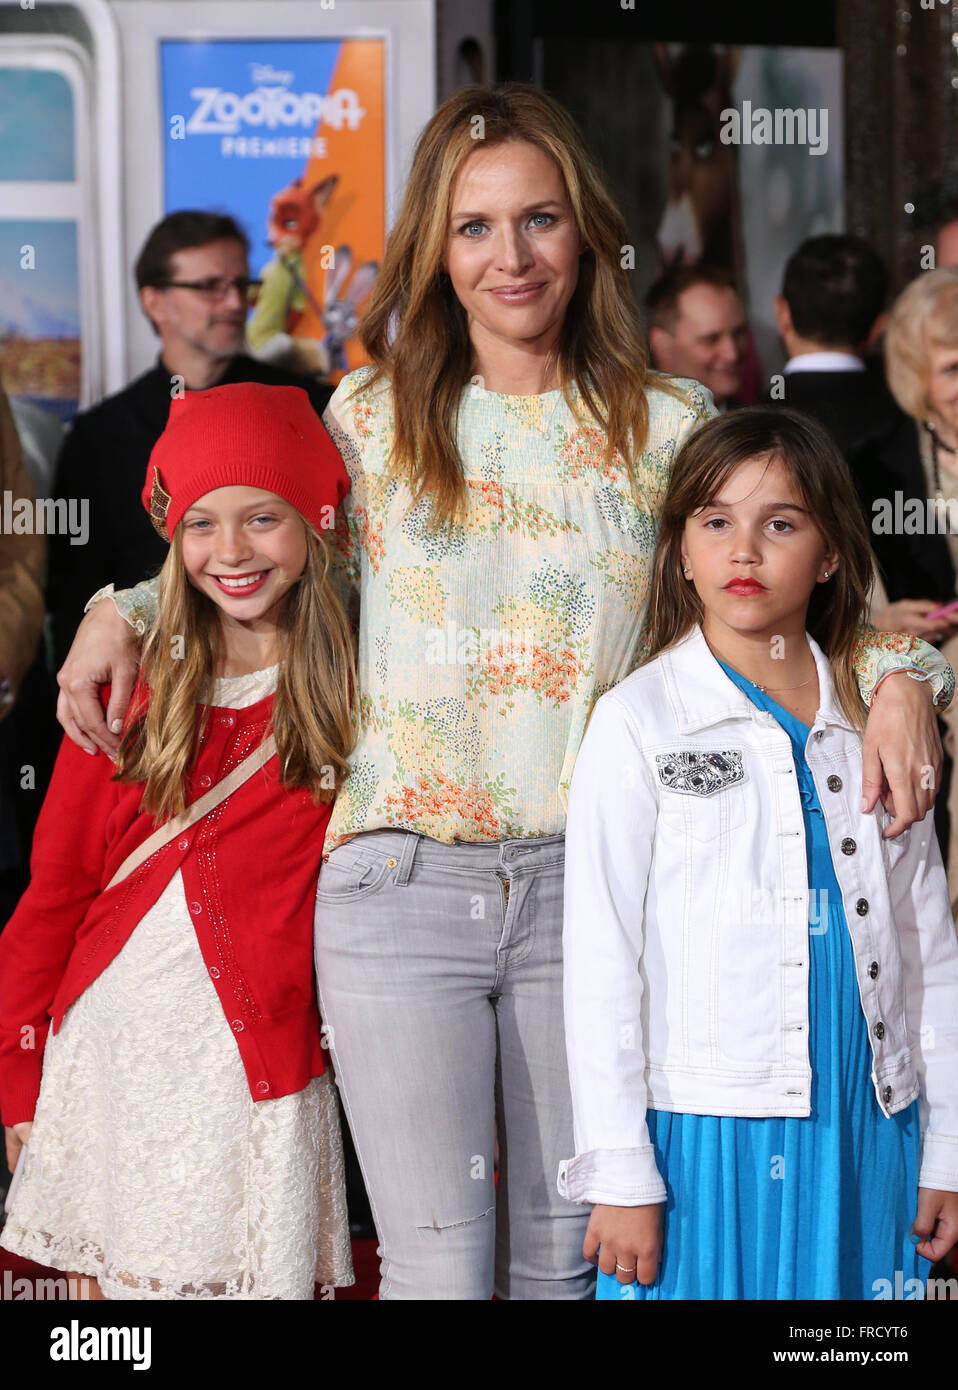 Los Angeles Premiere of Walt Disney Animation Studios' 'Zootopia' held at  the El Capitan Theatre - Arrivals Featuring: Jessalyn Gilsig, Penelope  Salomon Where: Hollywood, California, United States When: 17 Feb 2016 Stock  Photo - Alamy